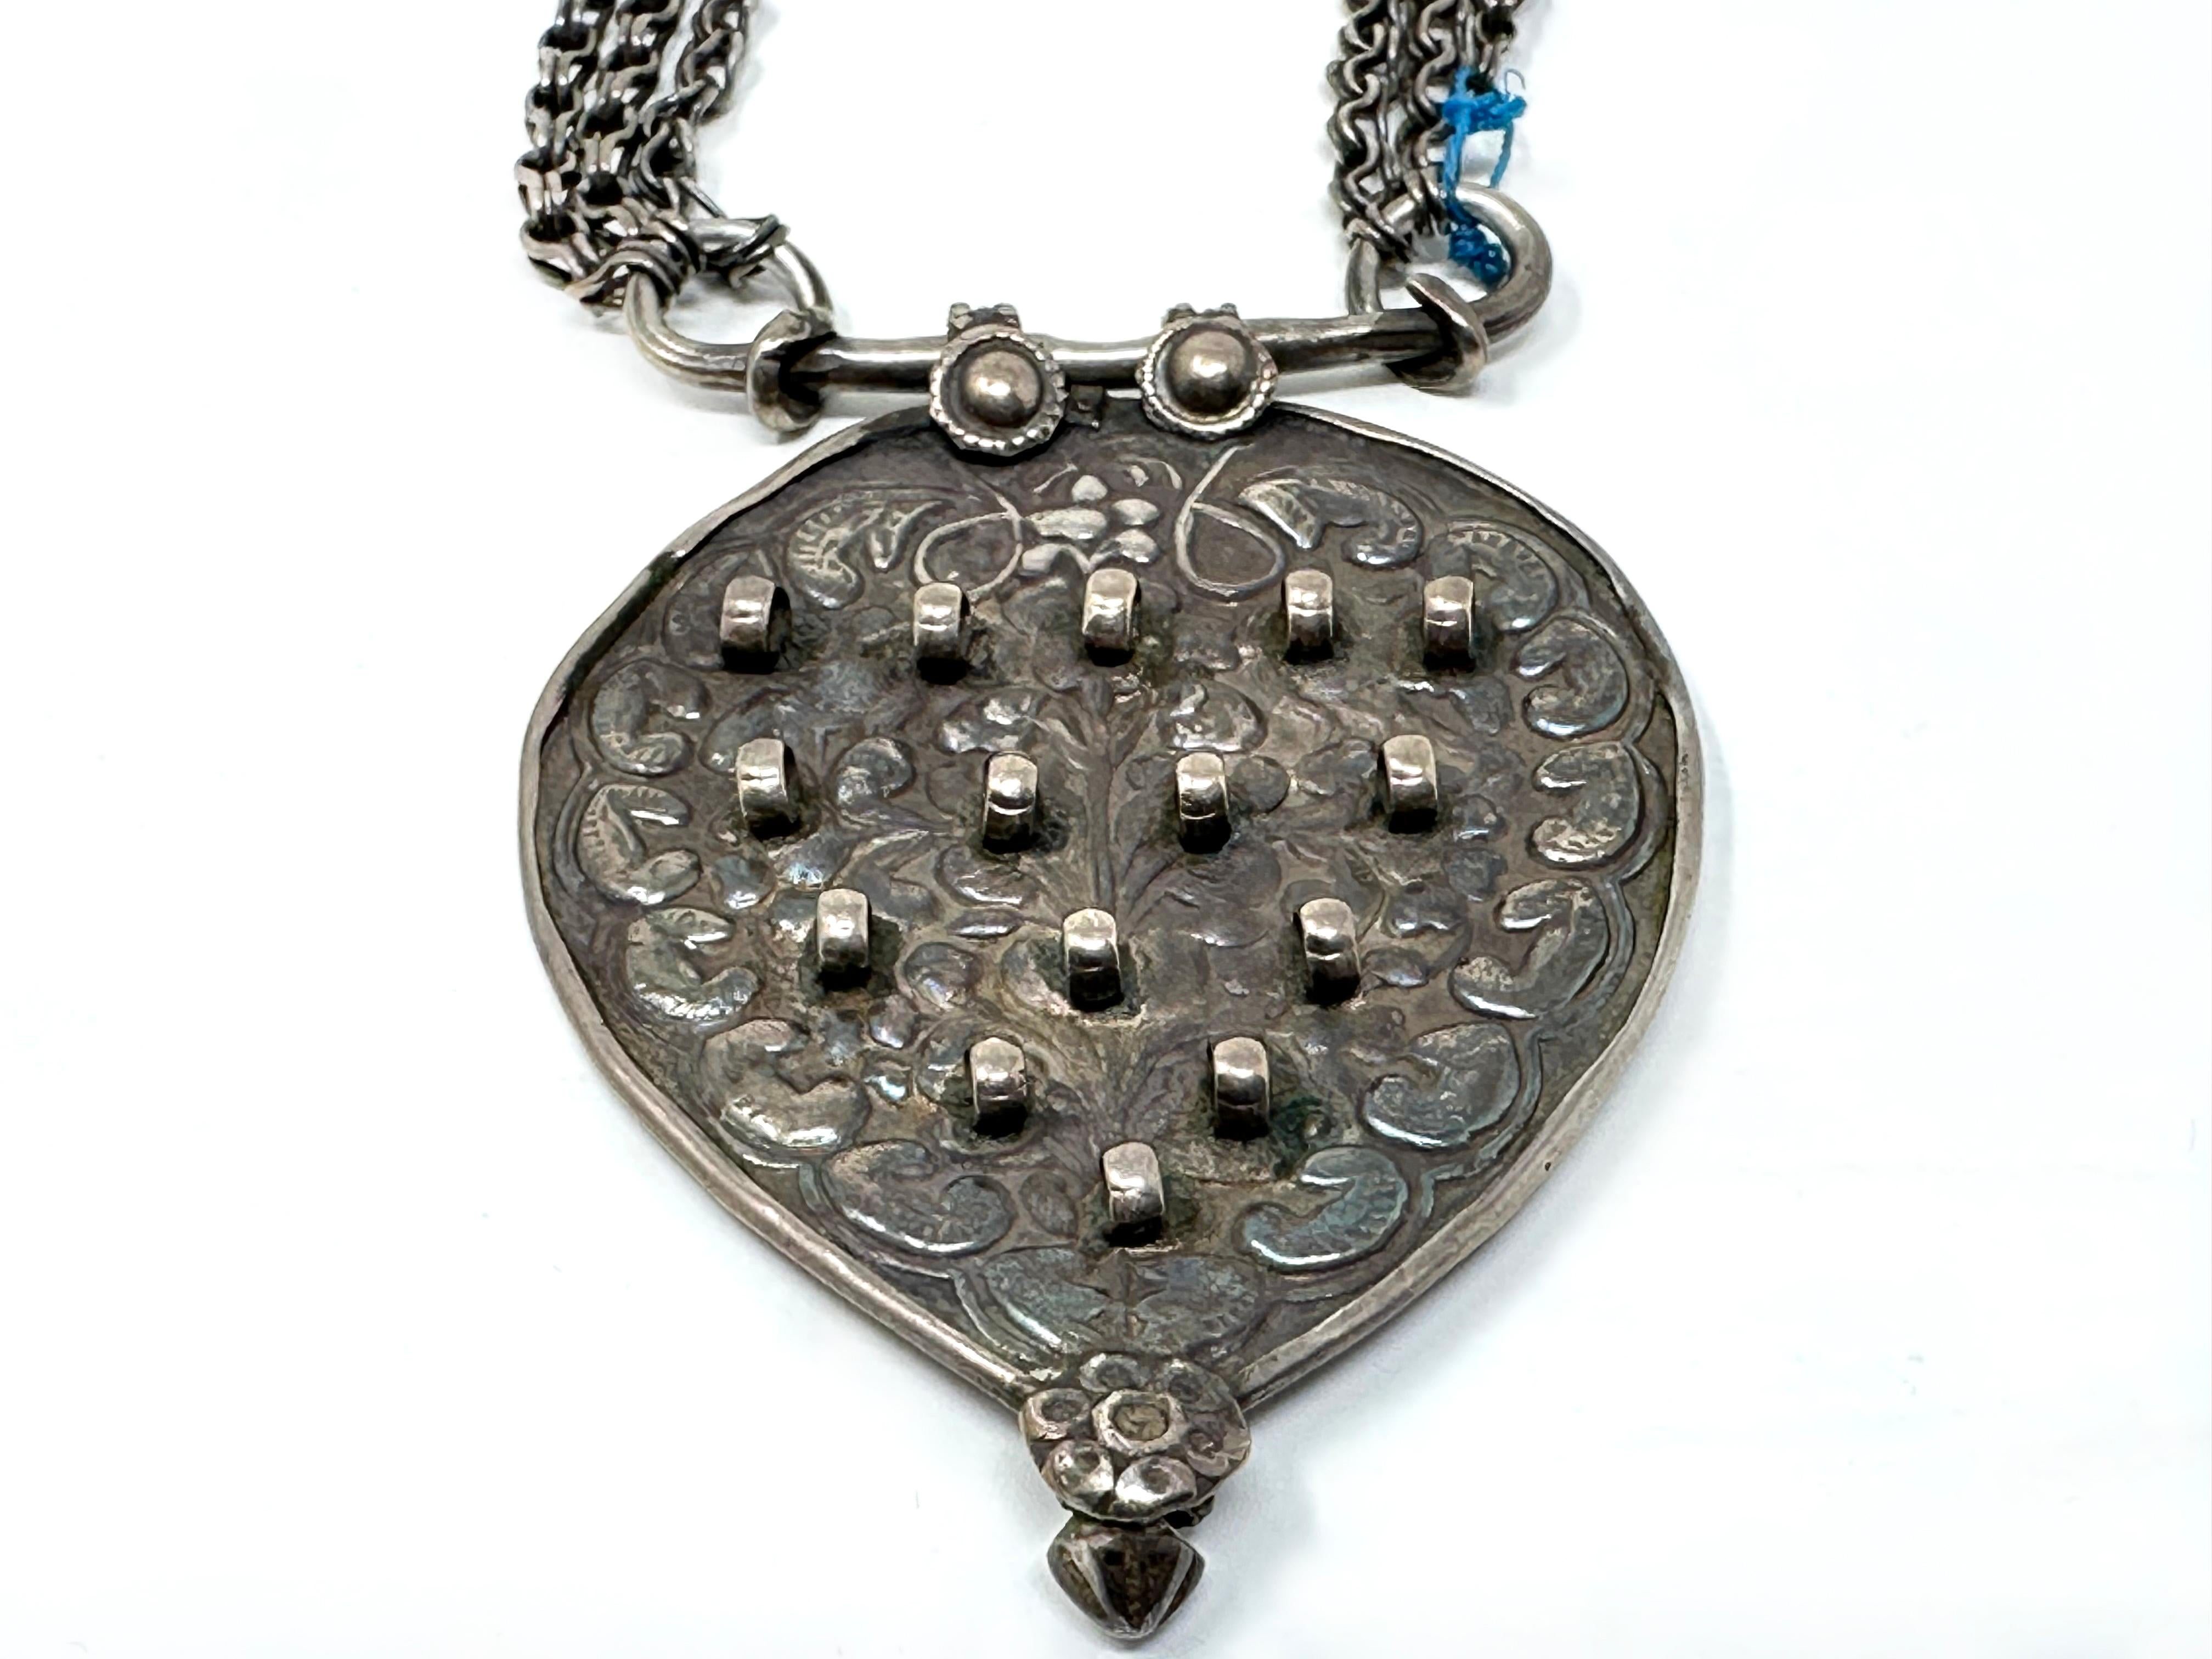 EARLY 1900’s Tribal MUGHAL INDIAN OLD SILVER NECKLACE
Intricate one of a kind three dimensional piece  in Old Silver.
Large heavy piece with repousse design on verso. Triple hand forged link chain in old silver. 
As seen in the photographs the end